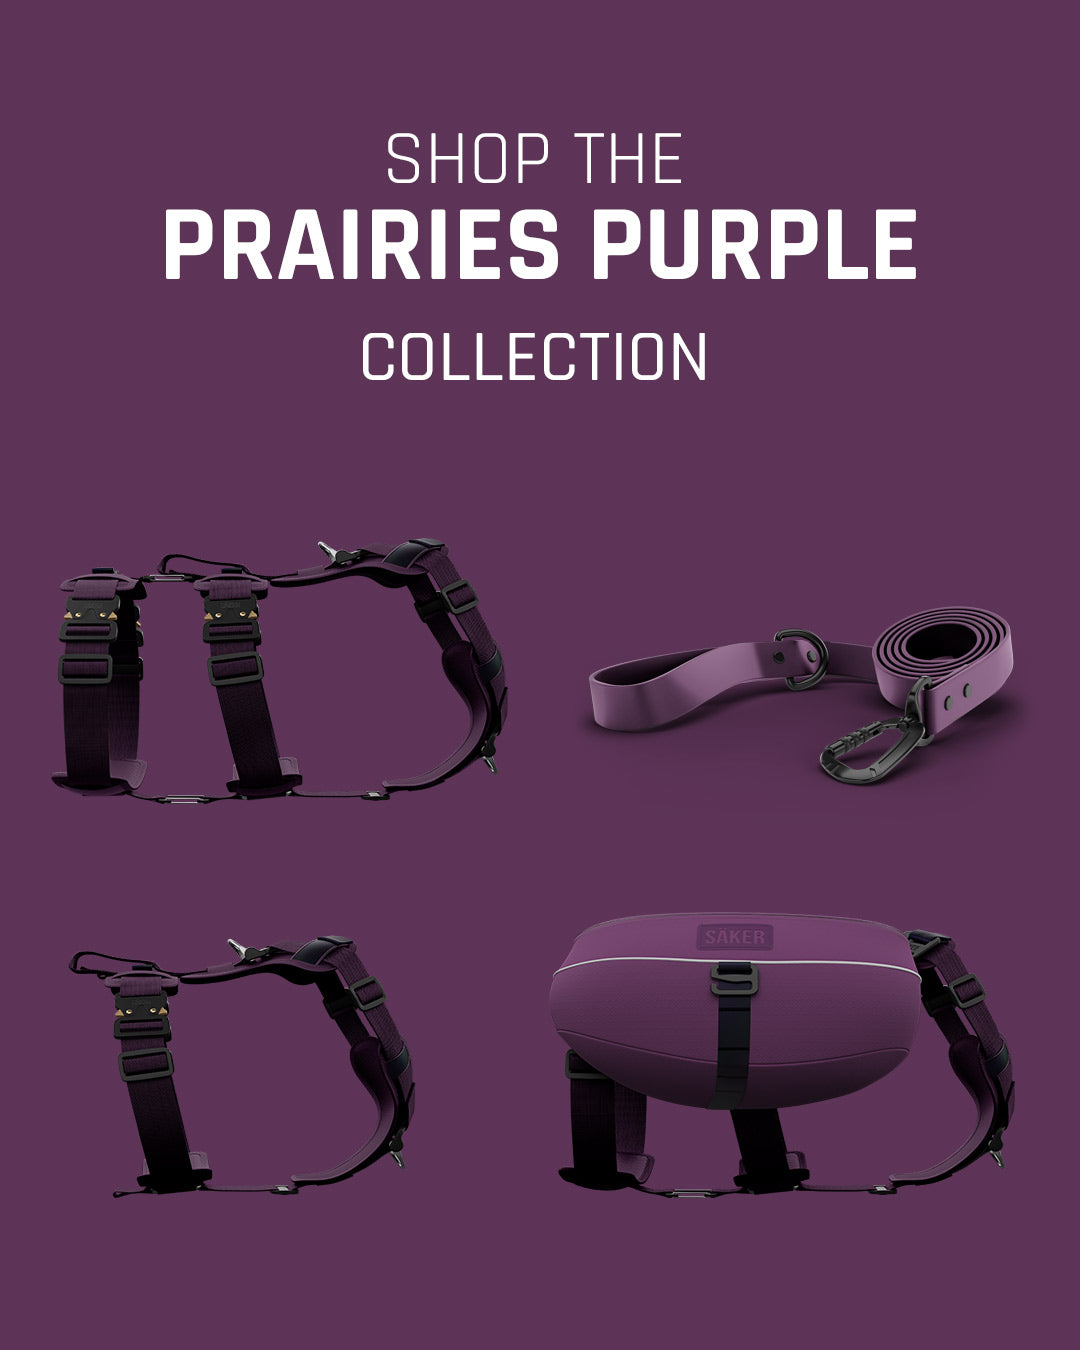 display of the prairies purple collection from Saker